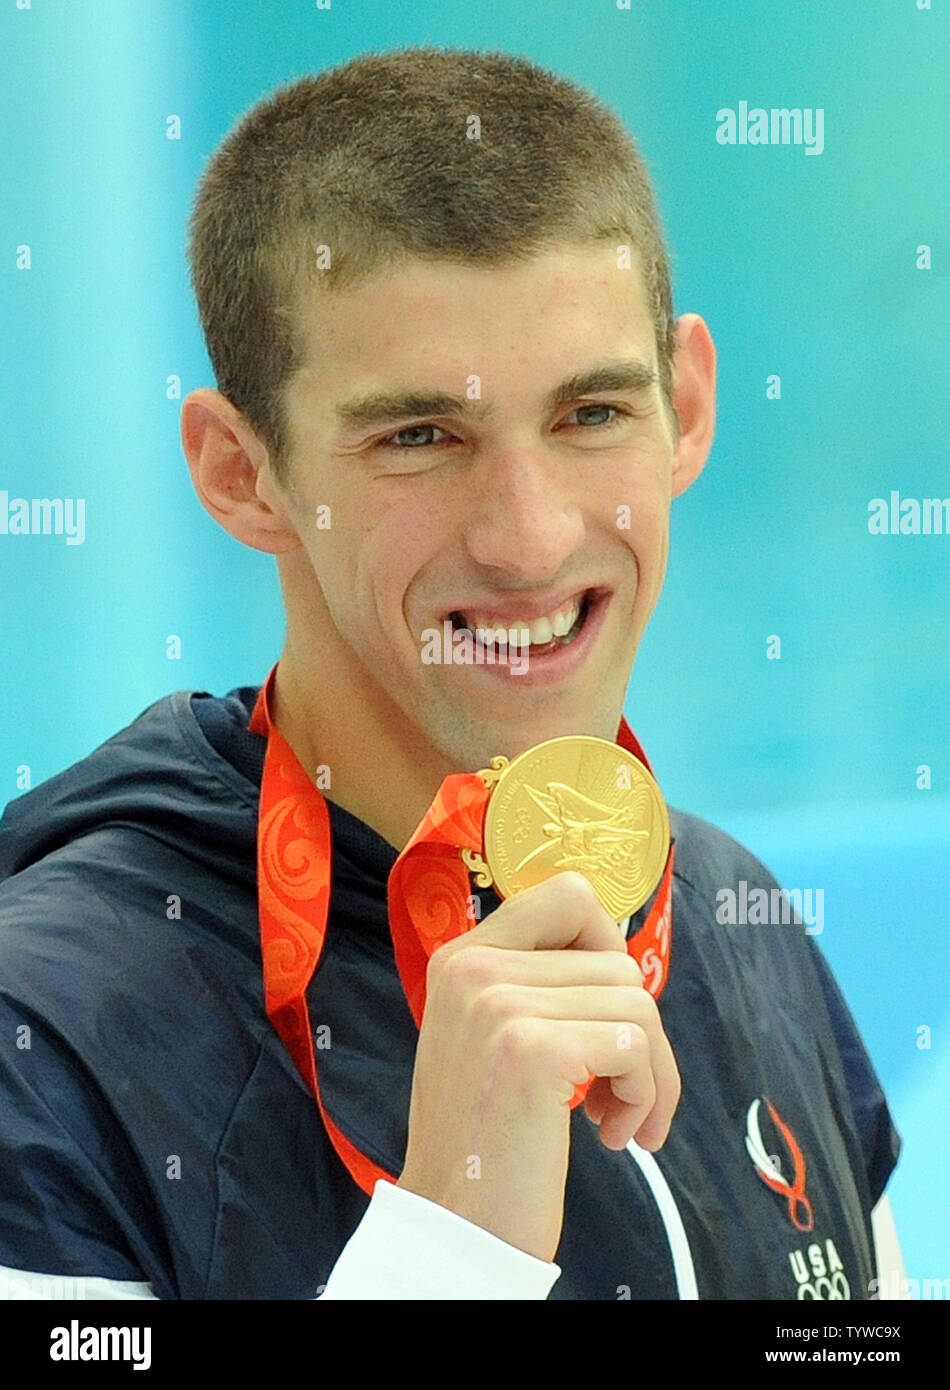 USA's Michael Phelps holds up his 7th gold medal won in the Men's 100M Butterfly final at the National Aquatic Center (Water Cube) during the 2008 Summer Olympics in Beijing, China, on August 16, 2008. Phelps is tied with Mark Spitz, the swimmer who set the record for 7 gold medals in a single Olympics in Munich, 1972.   (UPI Photo/Roger L. Wollenberg) Stock Photo